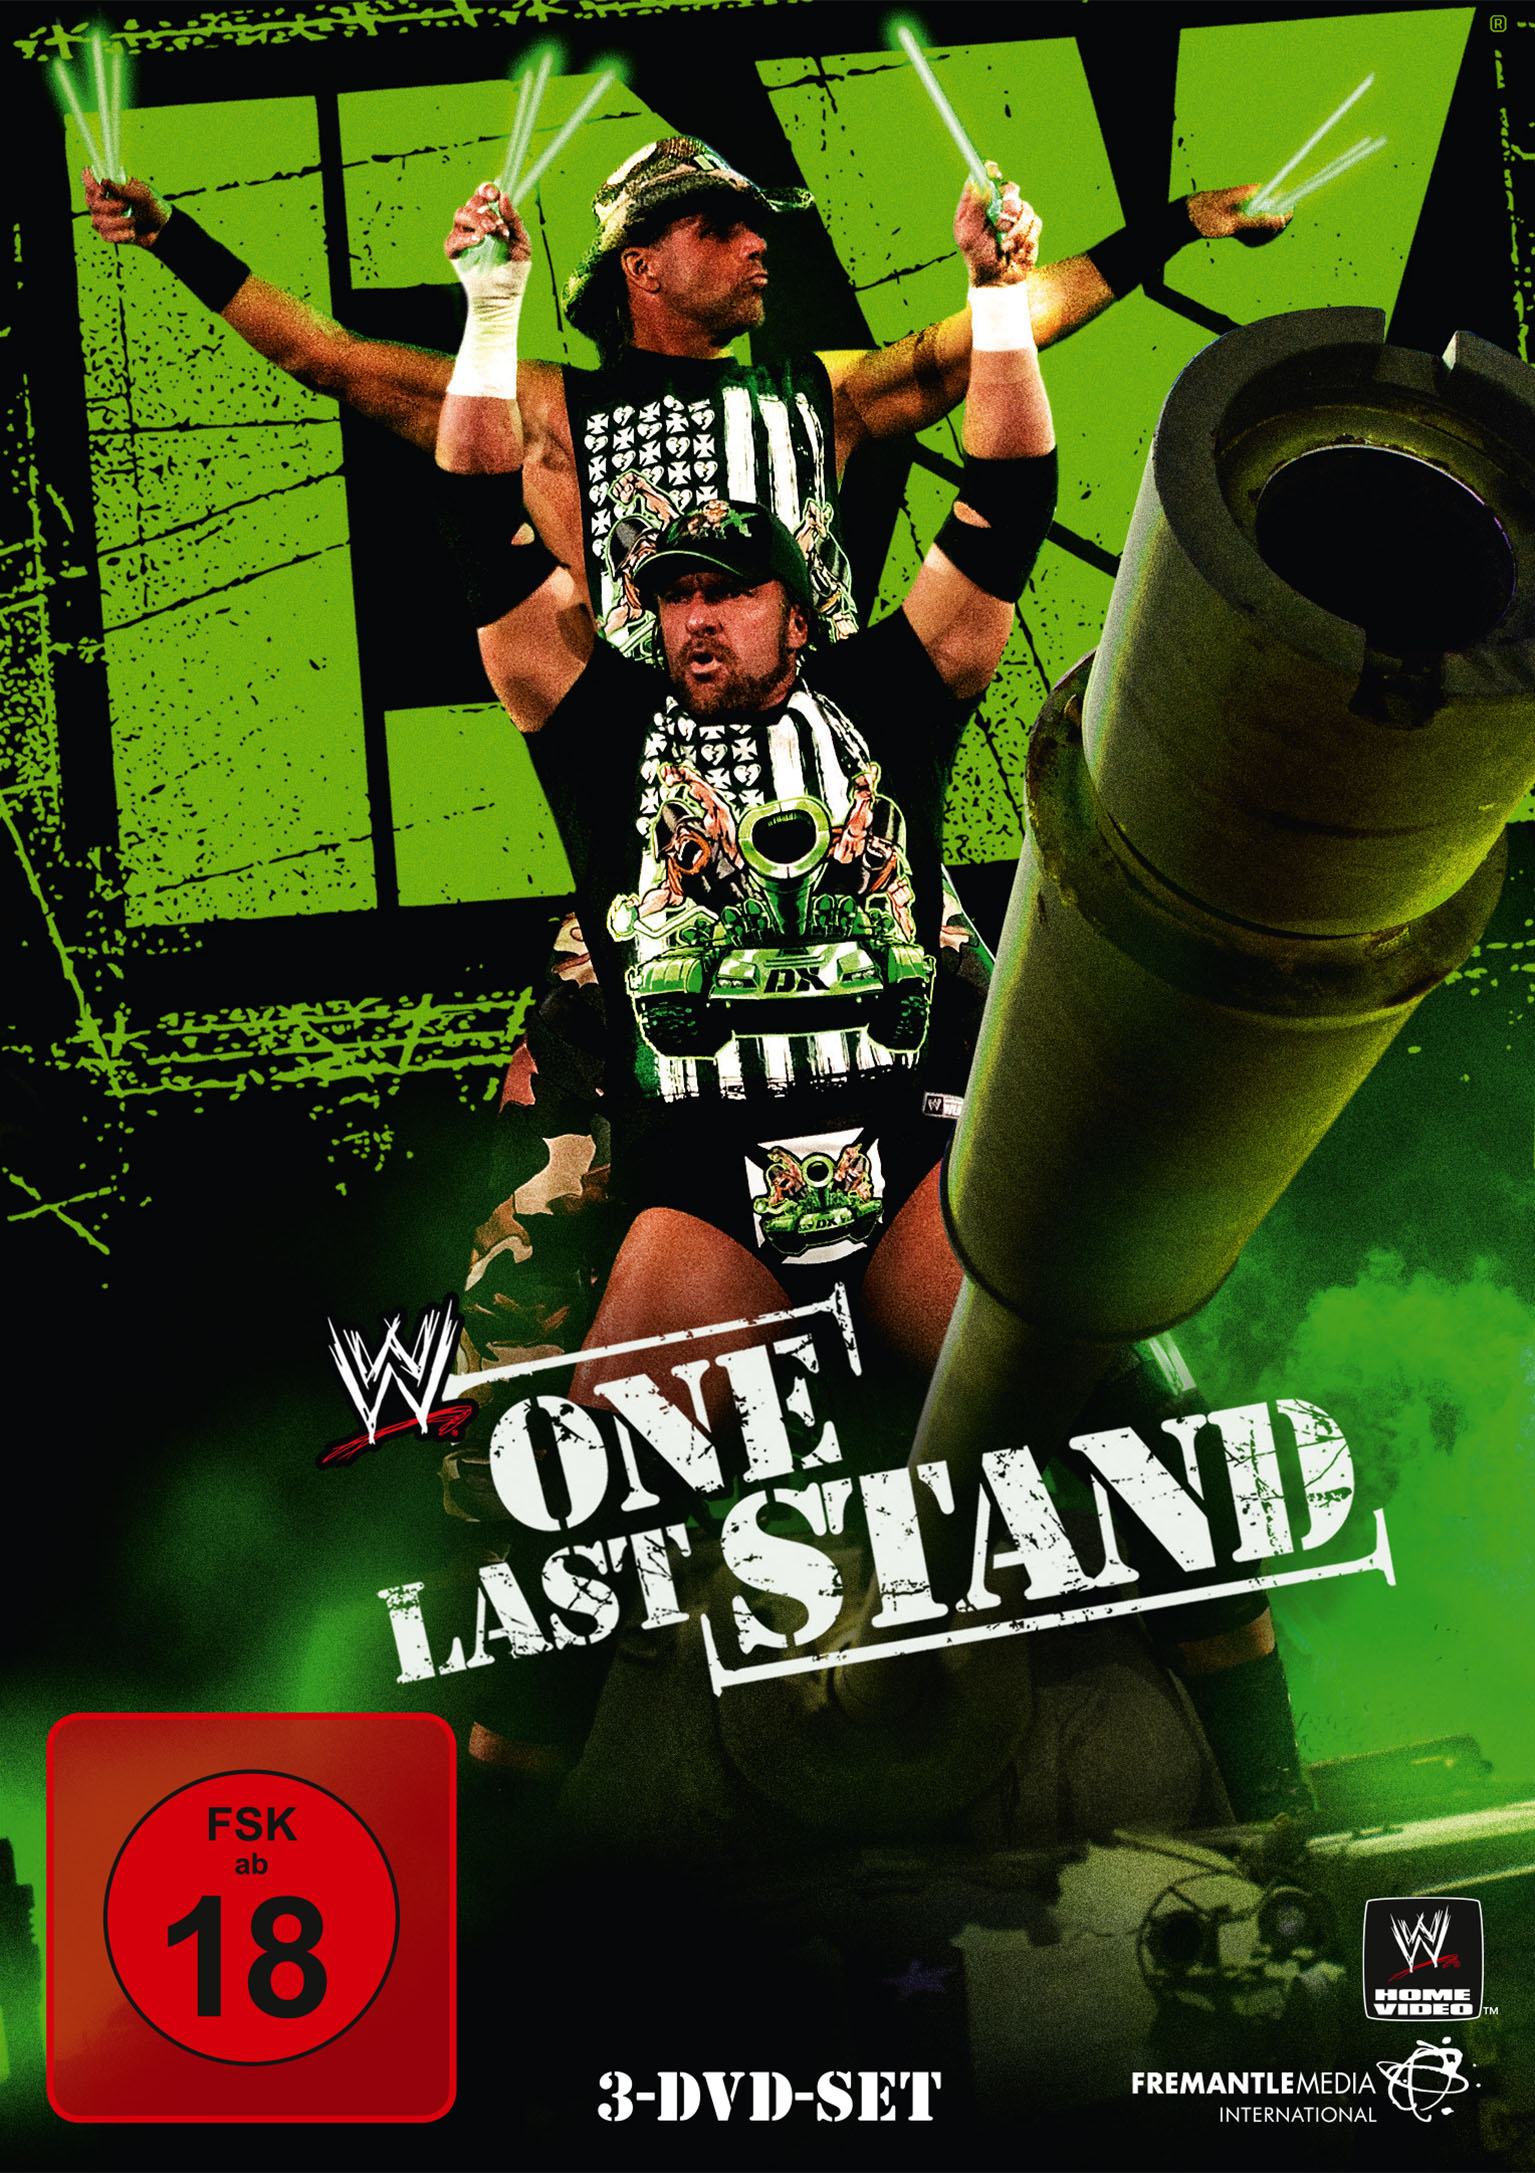 Last DX - DVD Stand One